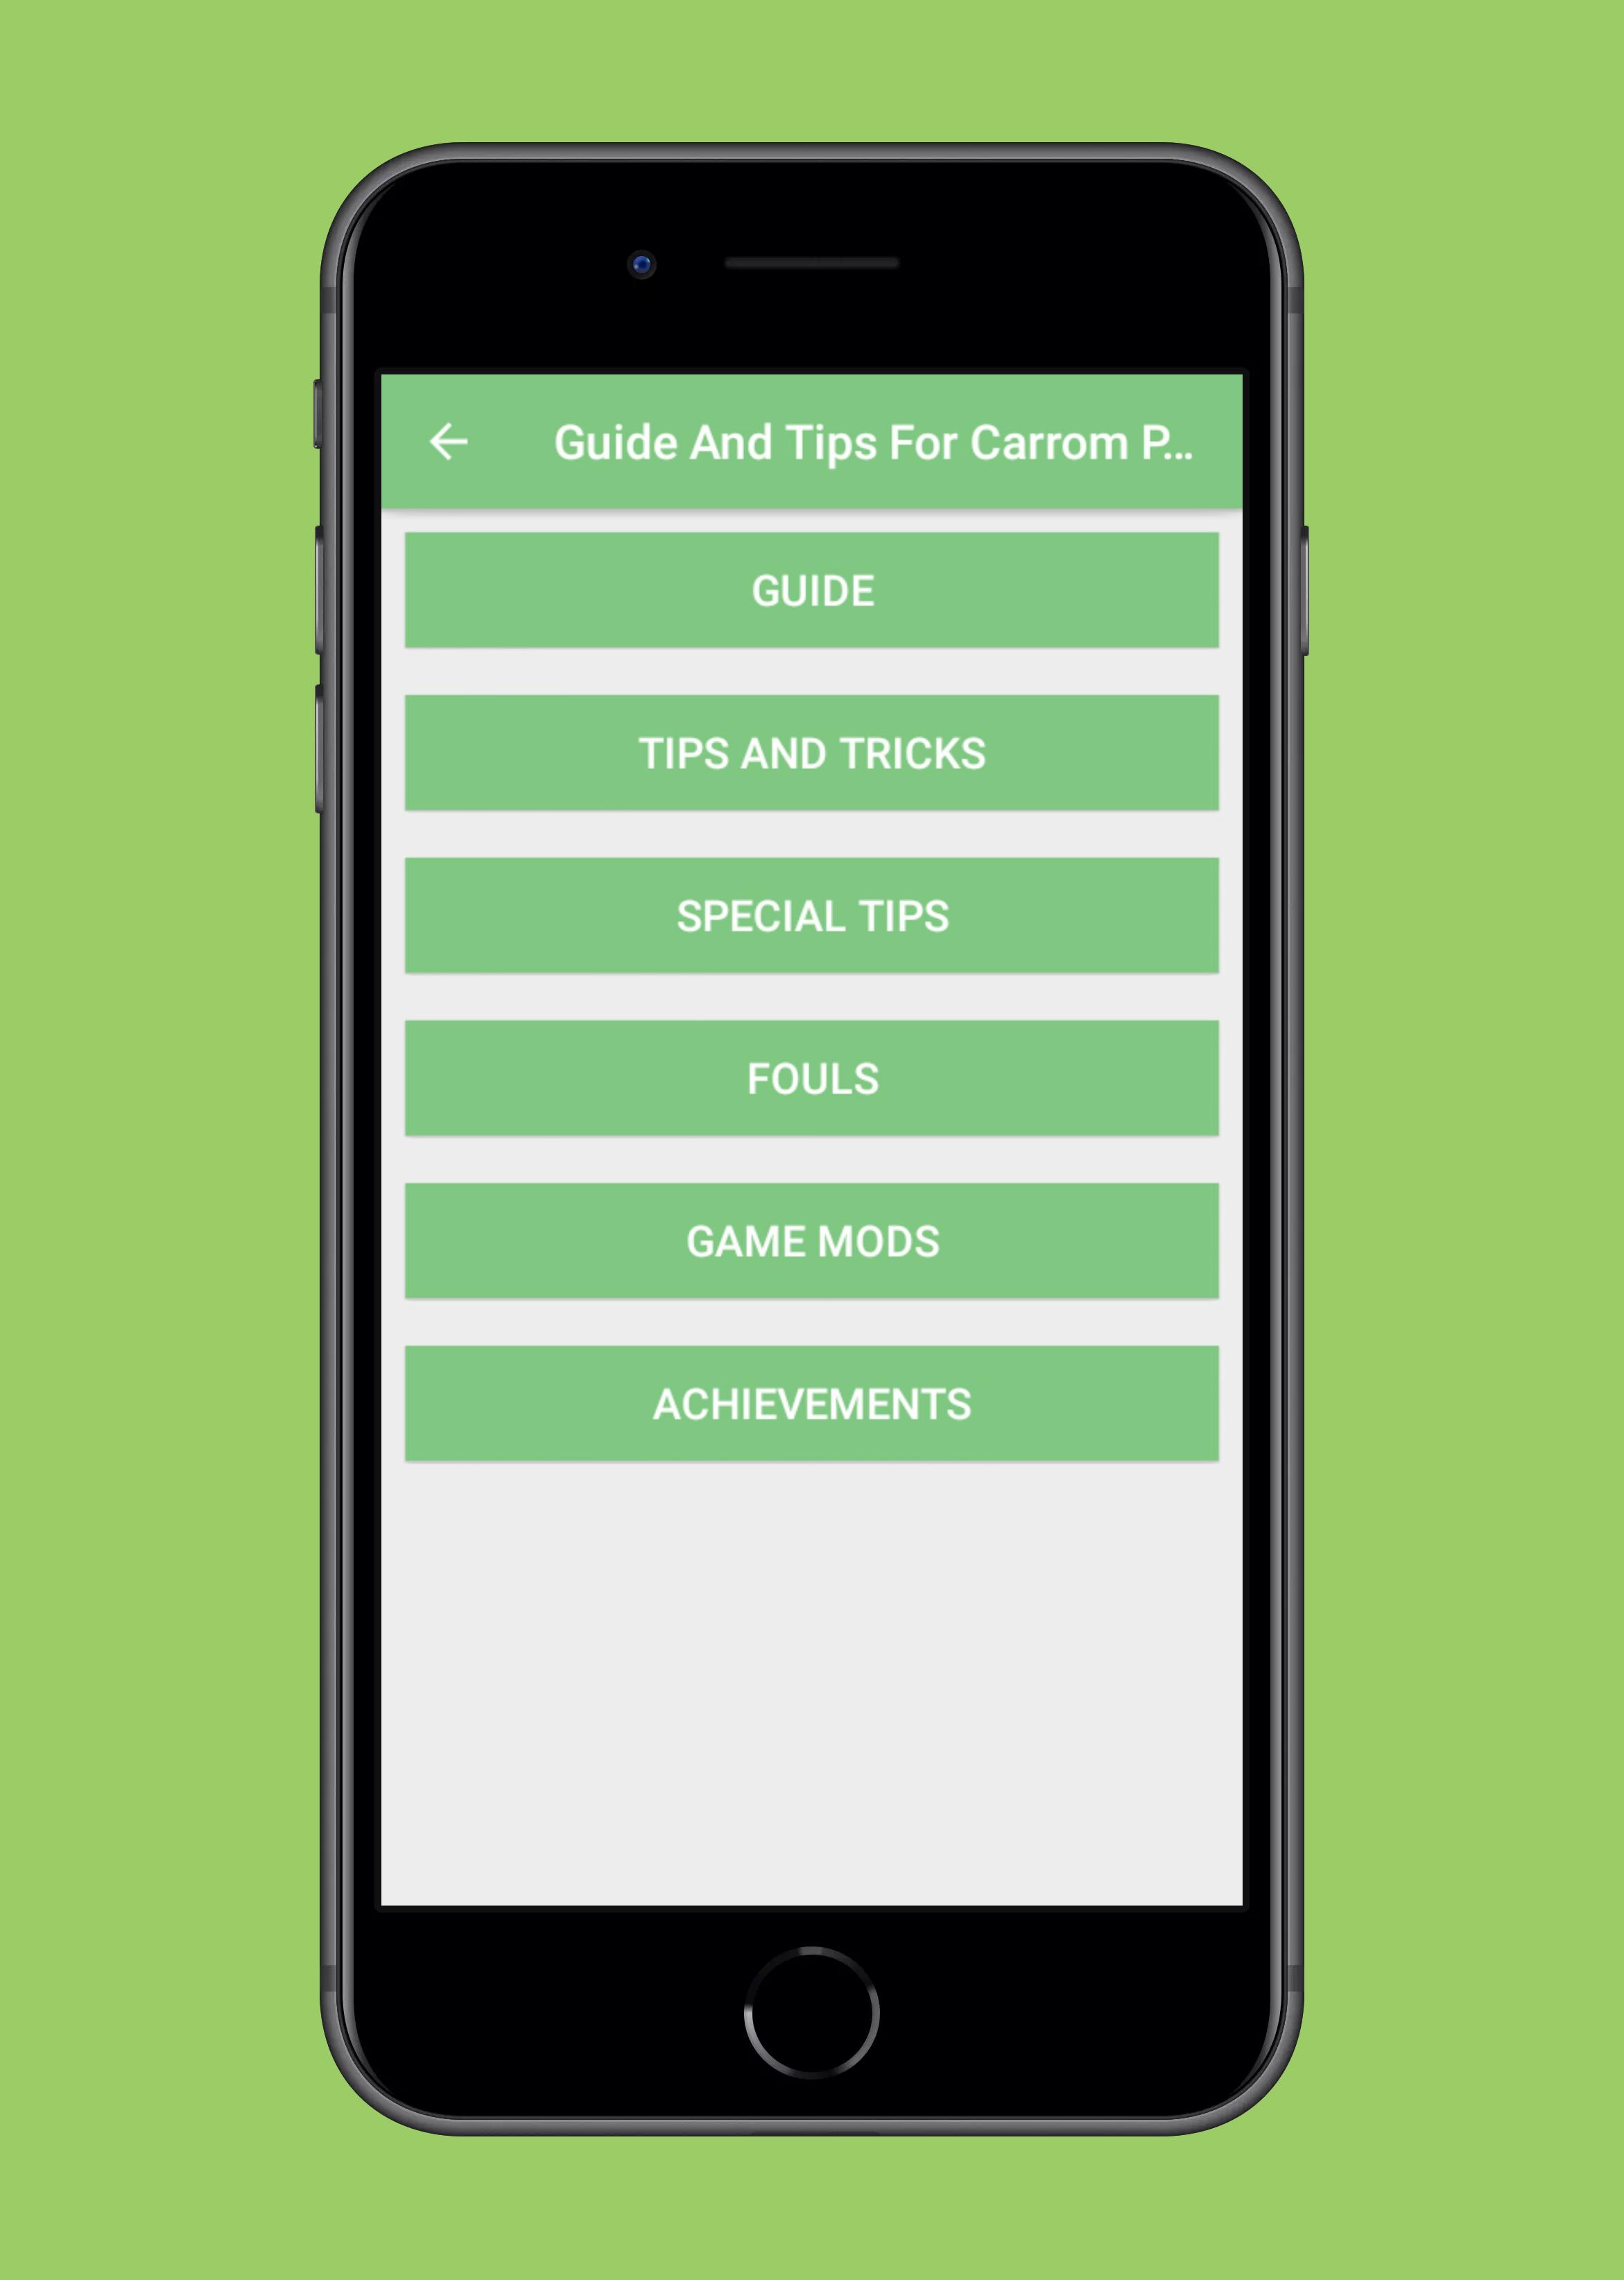 Guide And Tips For Carrom Pool For Android Apk Download